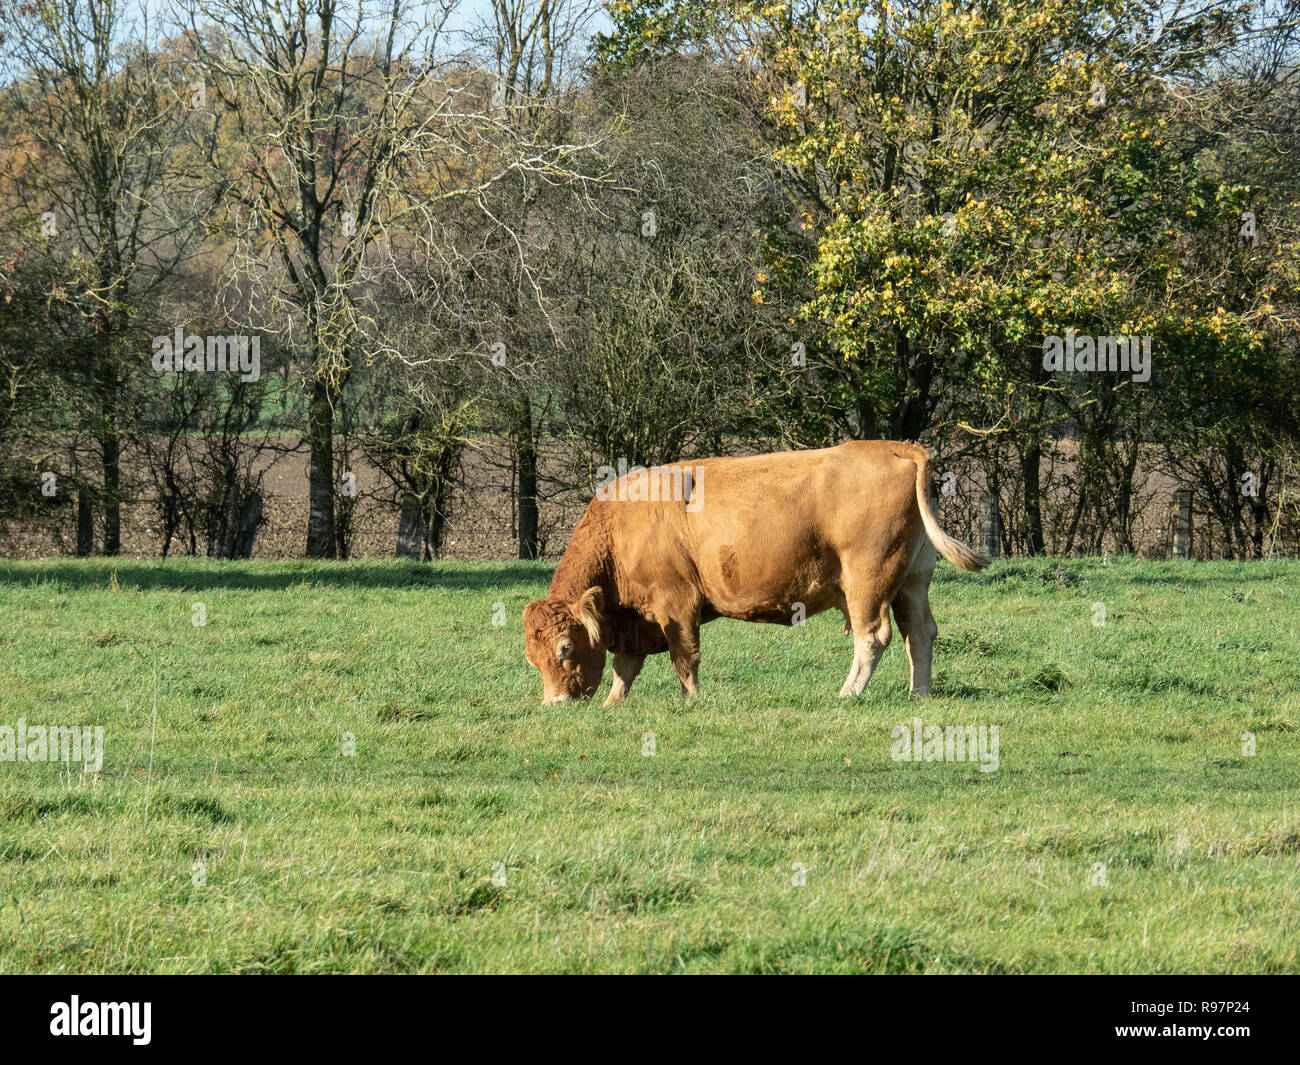 A single limousin cow grazing with a mature hedge in the background Stock Photo